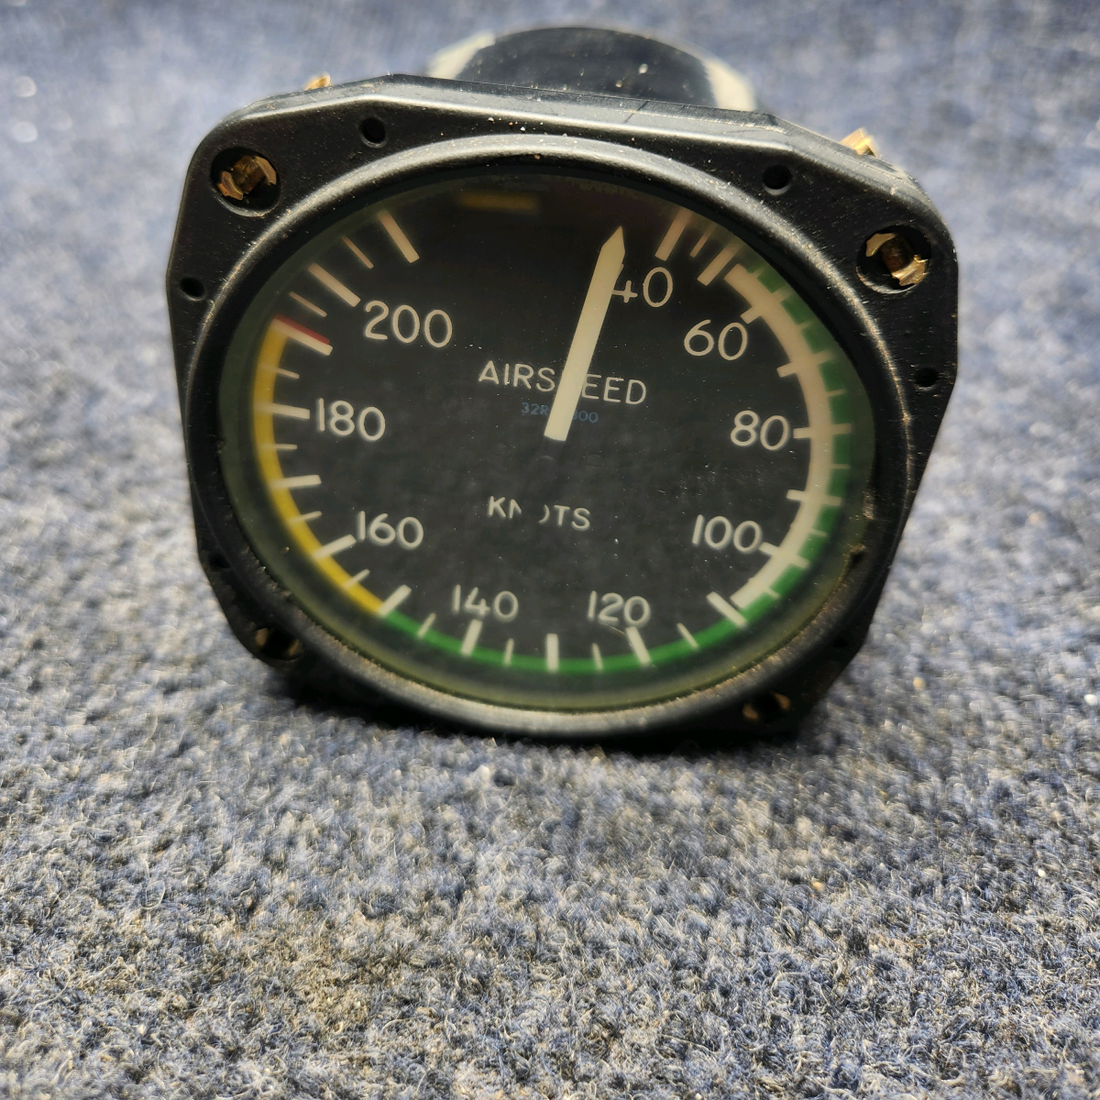 Used aircraft parts for sale, 8025 PIPIR PA32RT-300 UNITED INSTRUMENTS AIRSPEED INDICATOR PA32RT-300